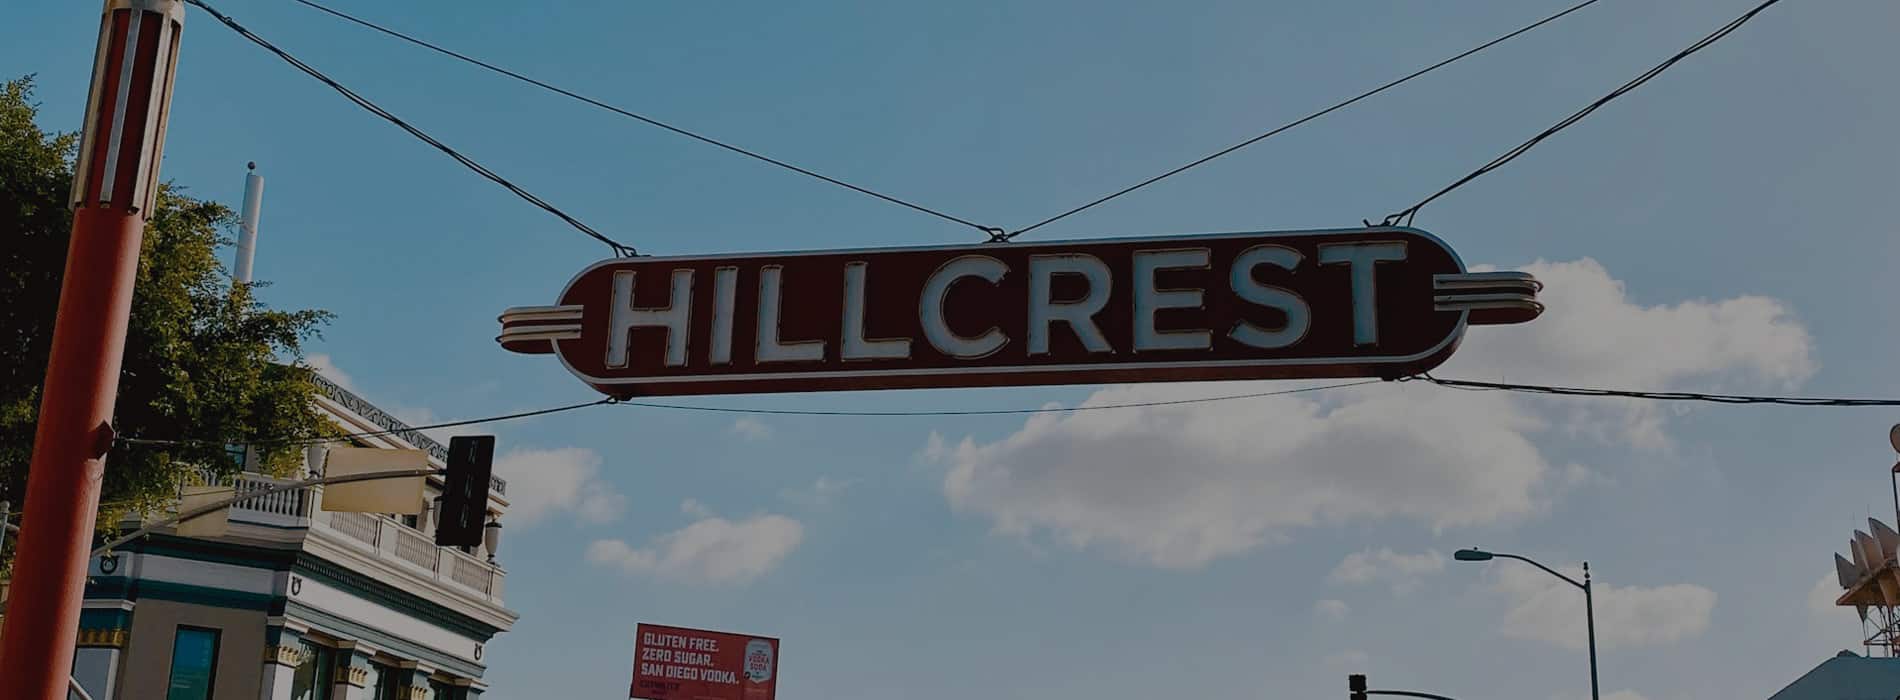 Hillcrest sign in San Diego. Discover homes for sale opportunities with the best real estate agents